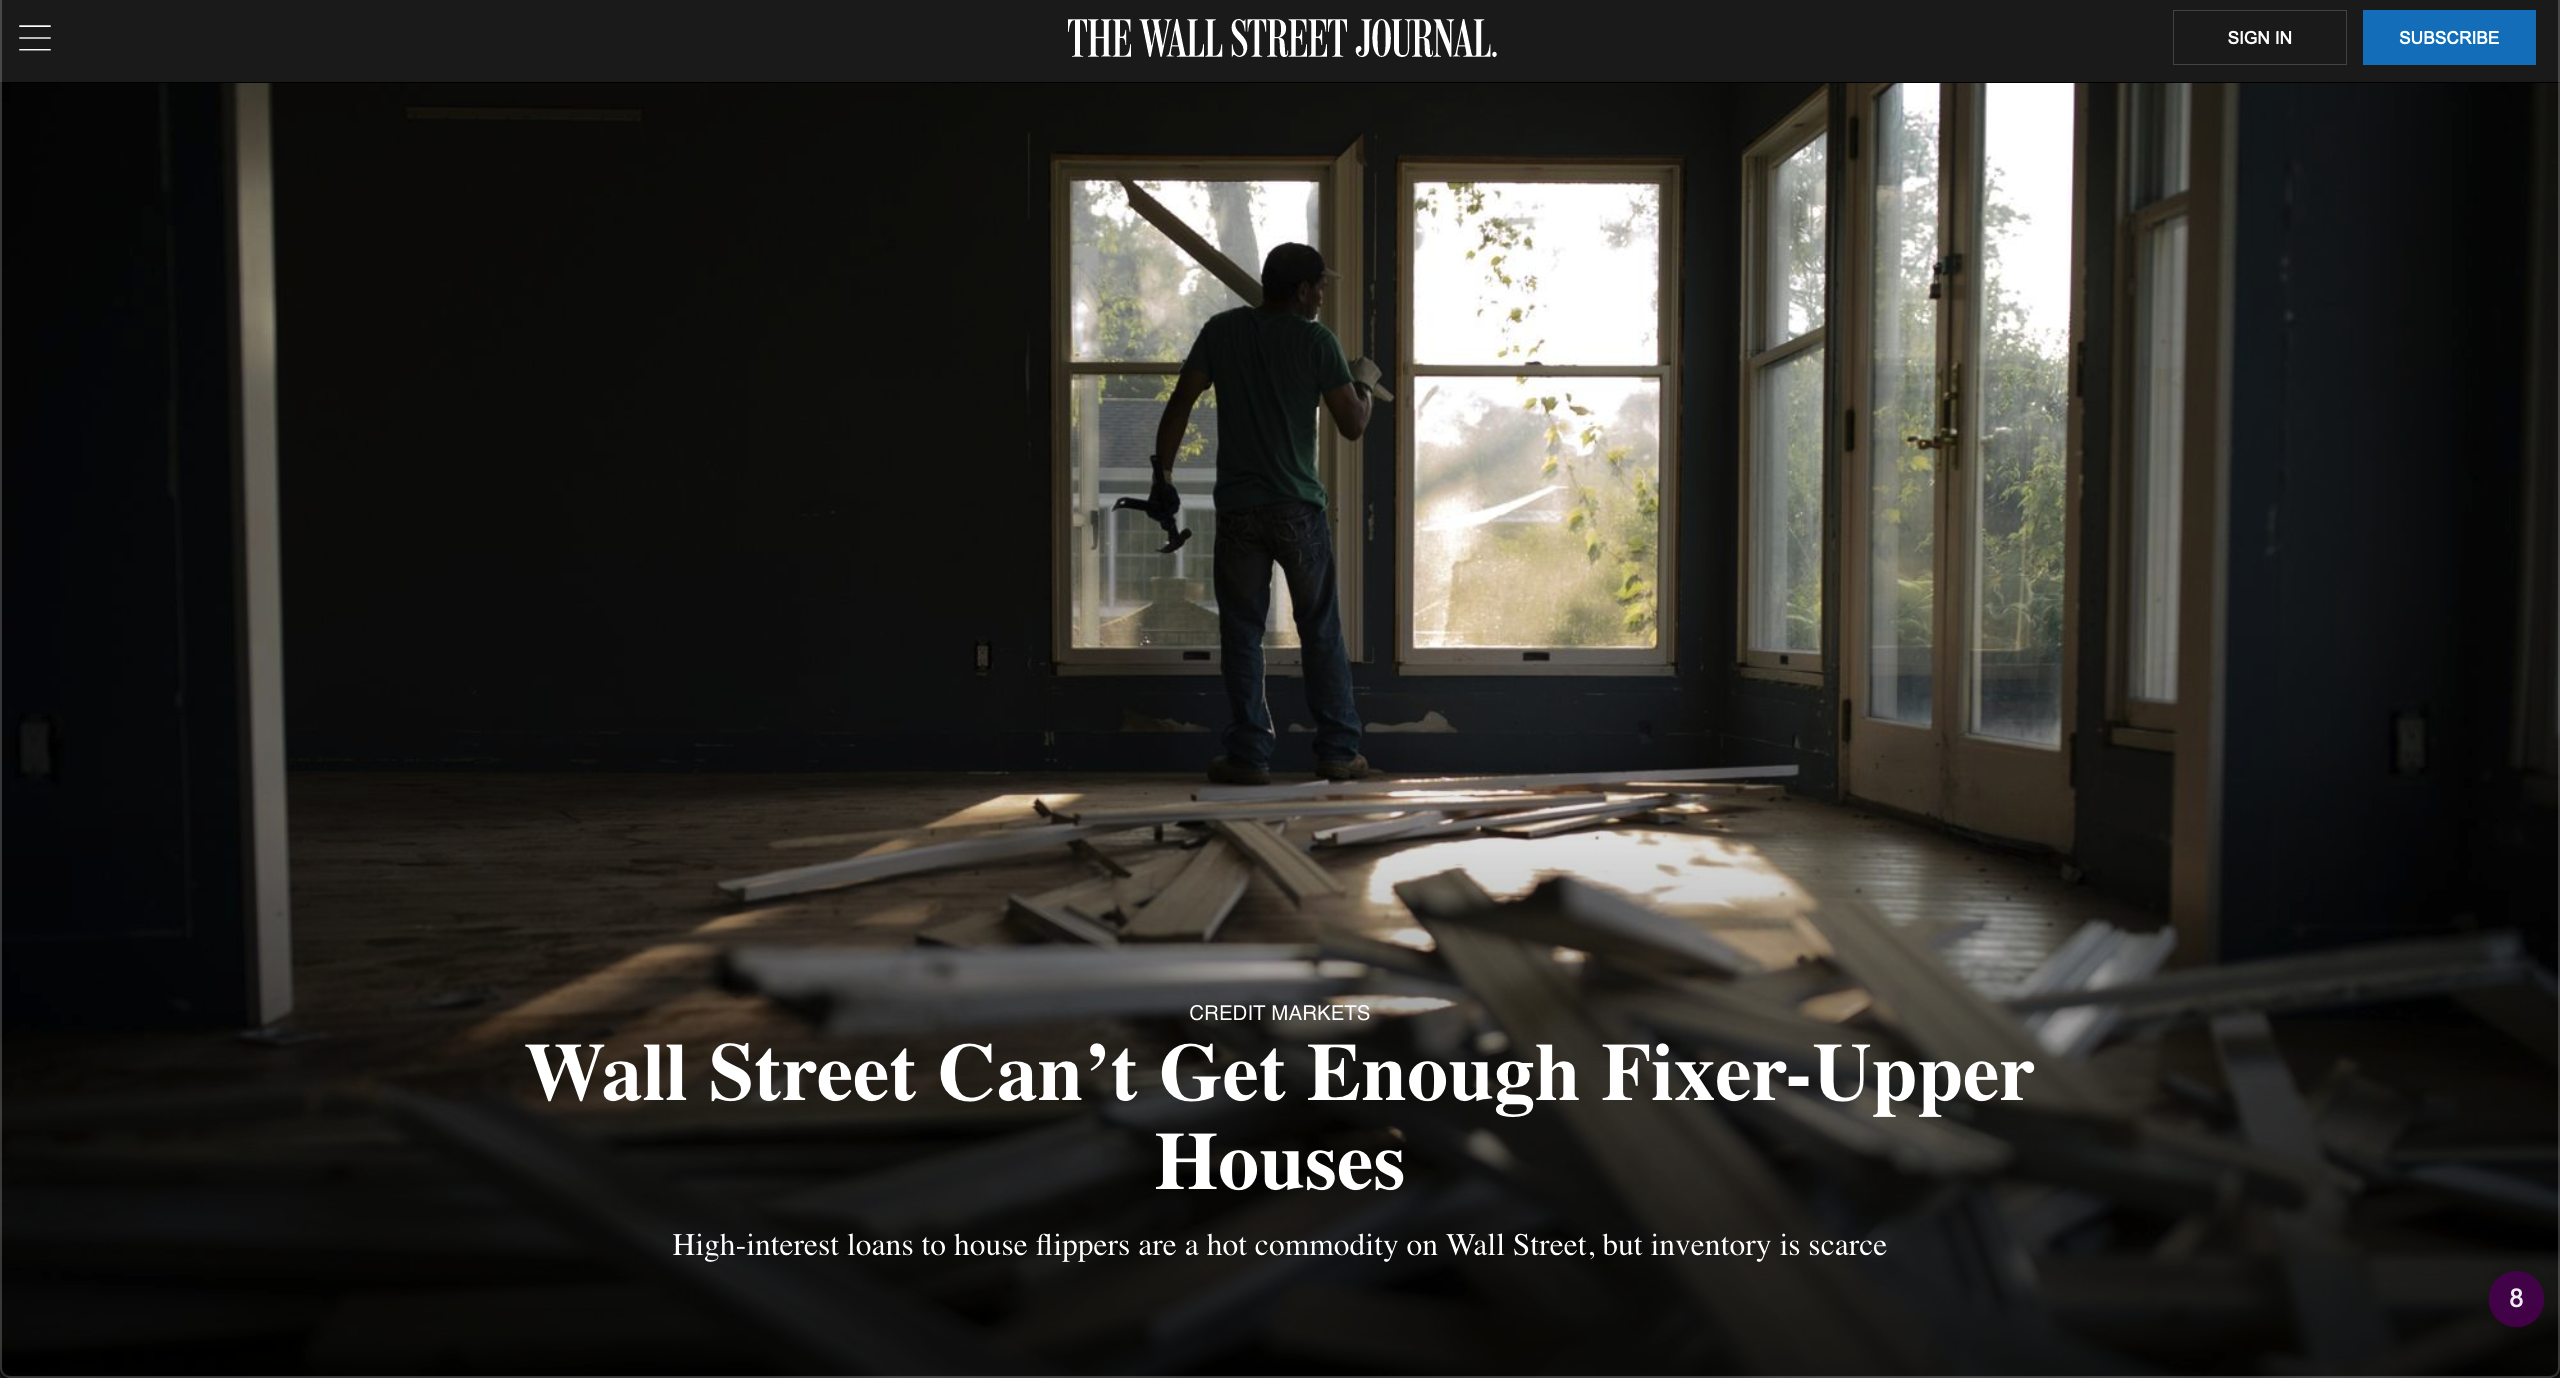 for The Wall Street Journal: Wall Street Can’t Get Enough Fixer-Upper Houses